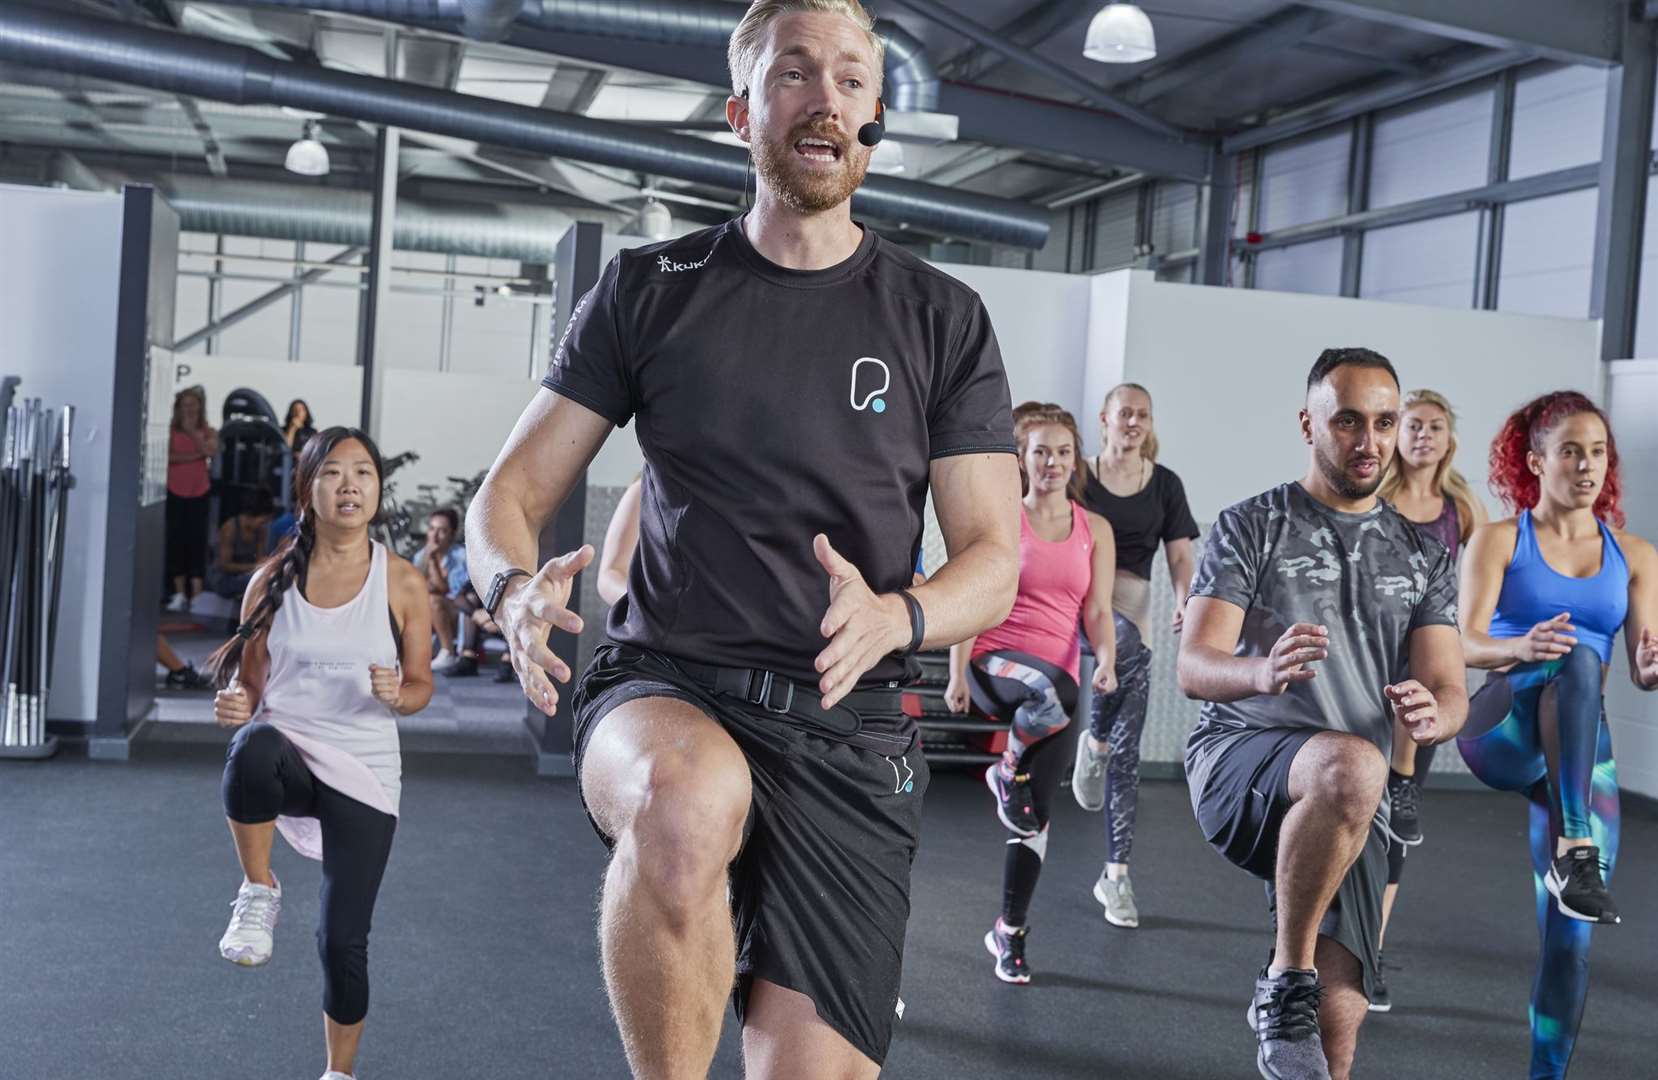 PureGym was set to open in the former stationery shop